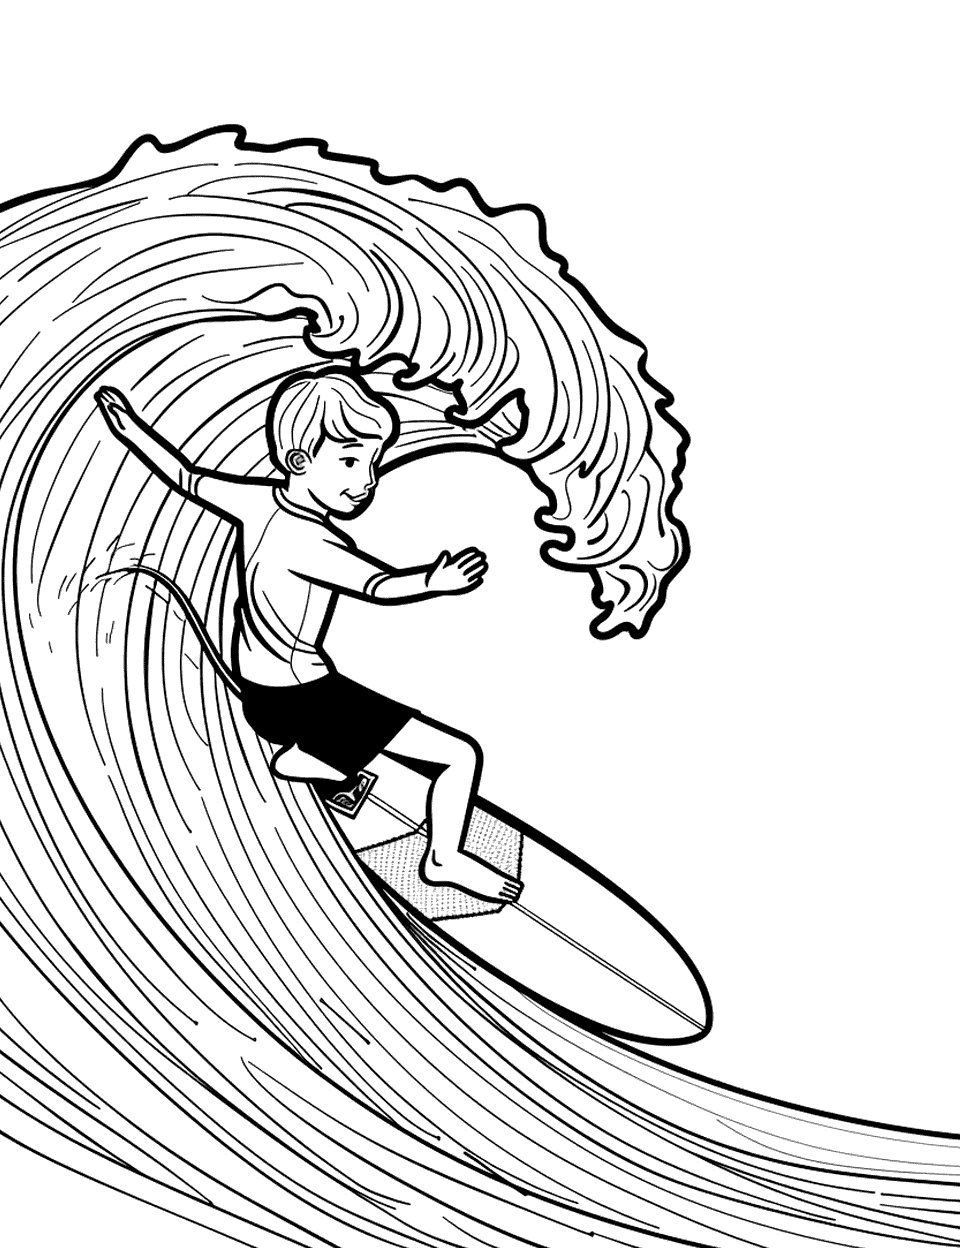 Surfing the Big Wave Sports Coloring Page - A surfer riding a large wave, with the sun setting in the background.